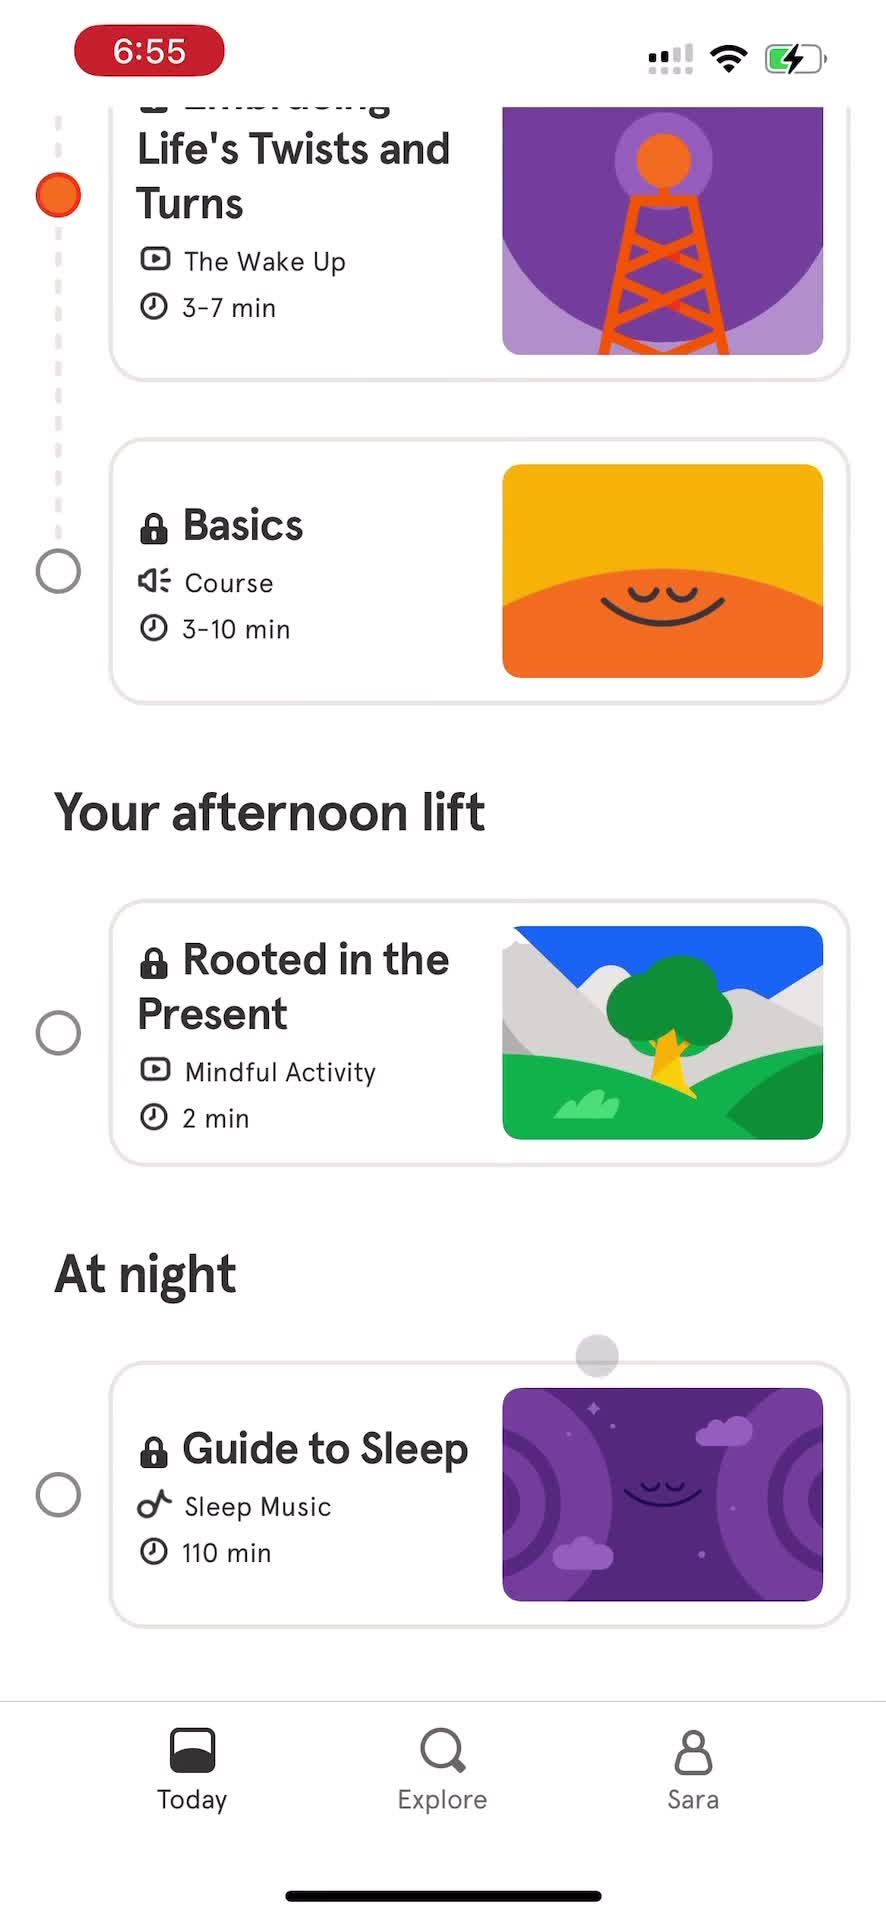 Screenshot of Home on Upgrading your account on Headspace user flow